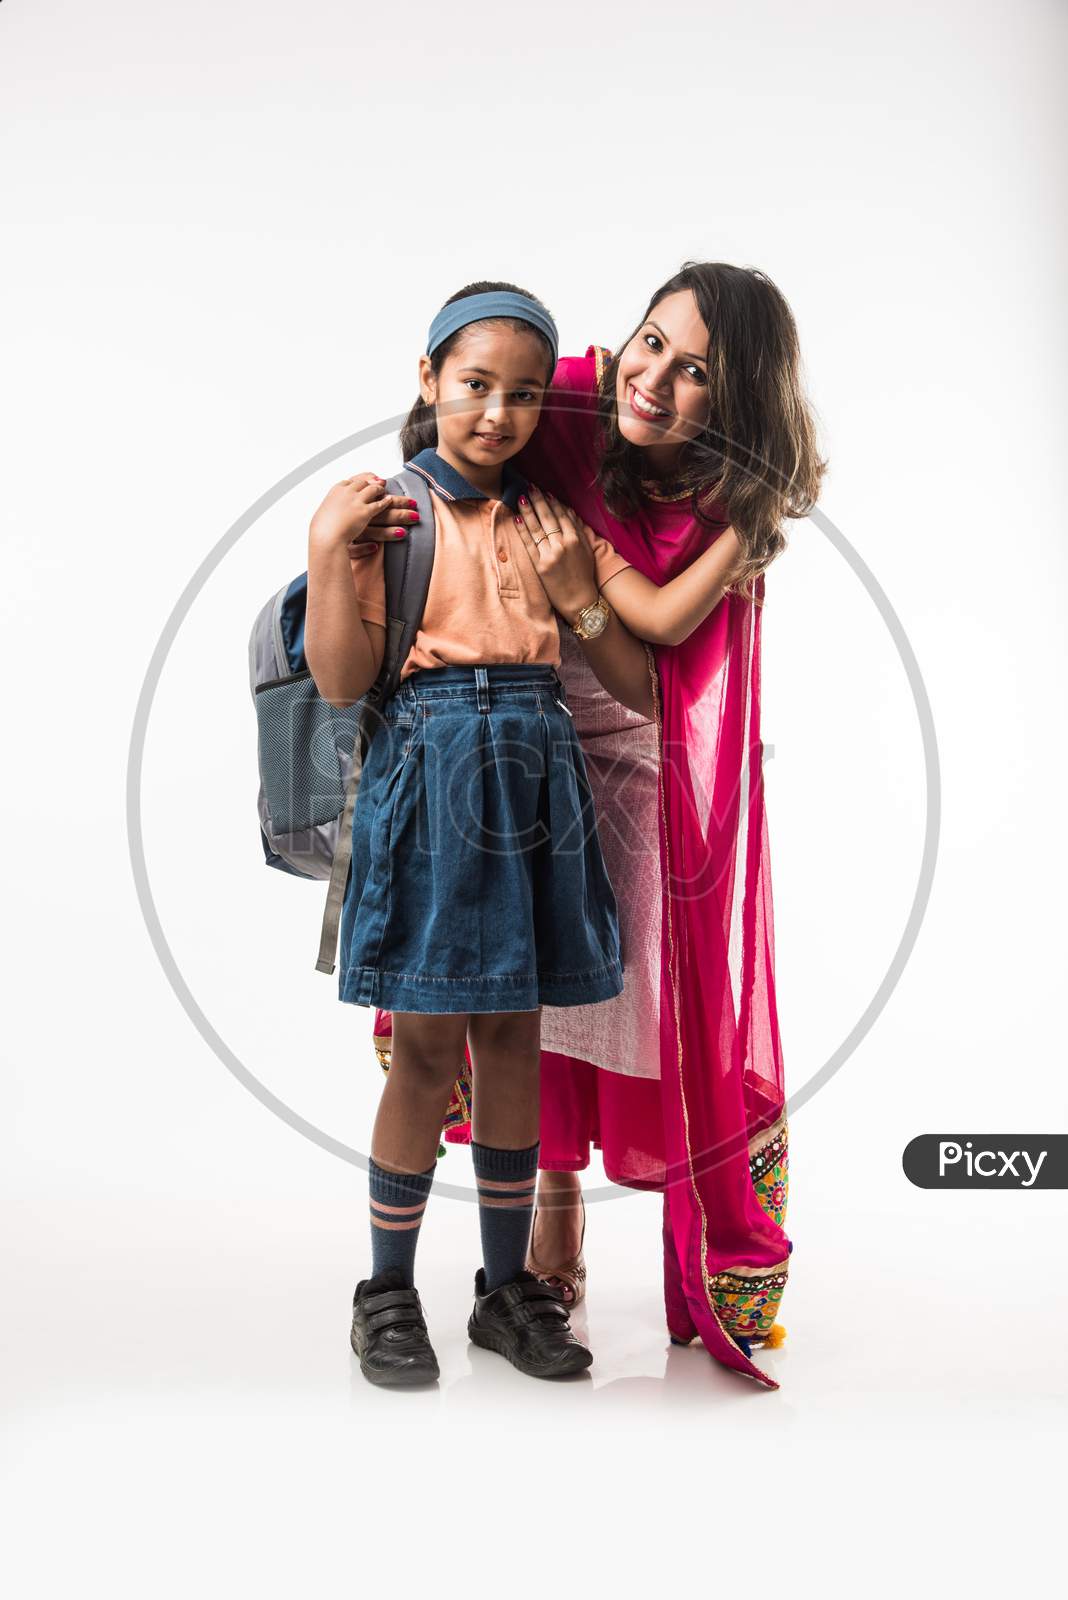 Indian Mother helping school girl with uniform getting ready with Lunch Box, hair style or waiting for school bus